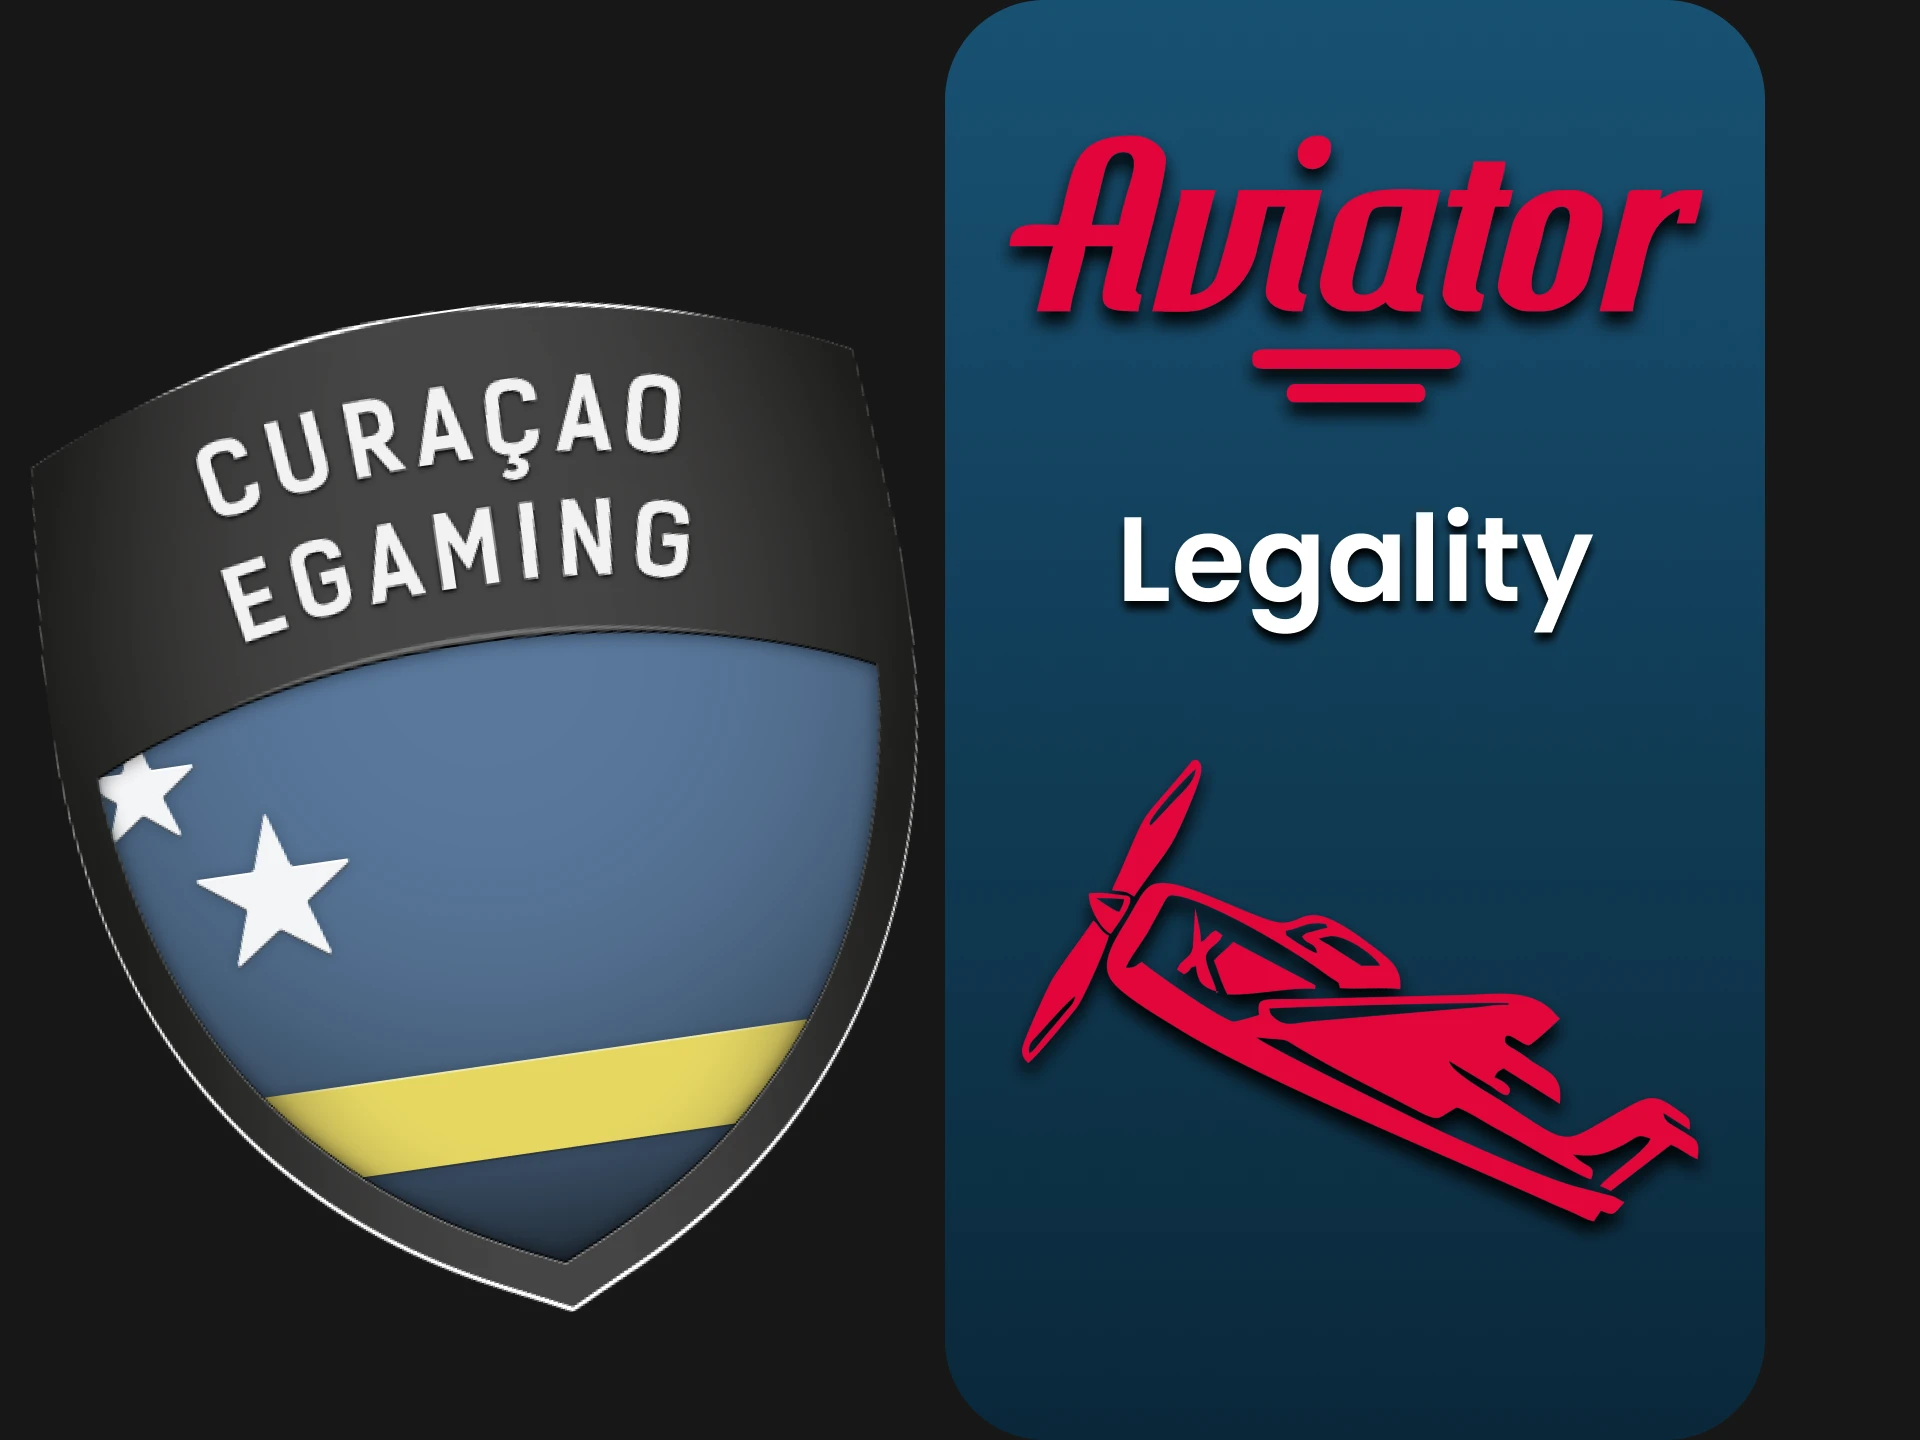 The Aviator game is completely legal and safe.